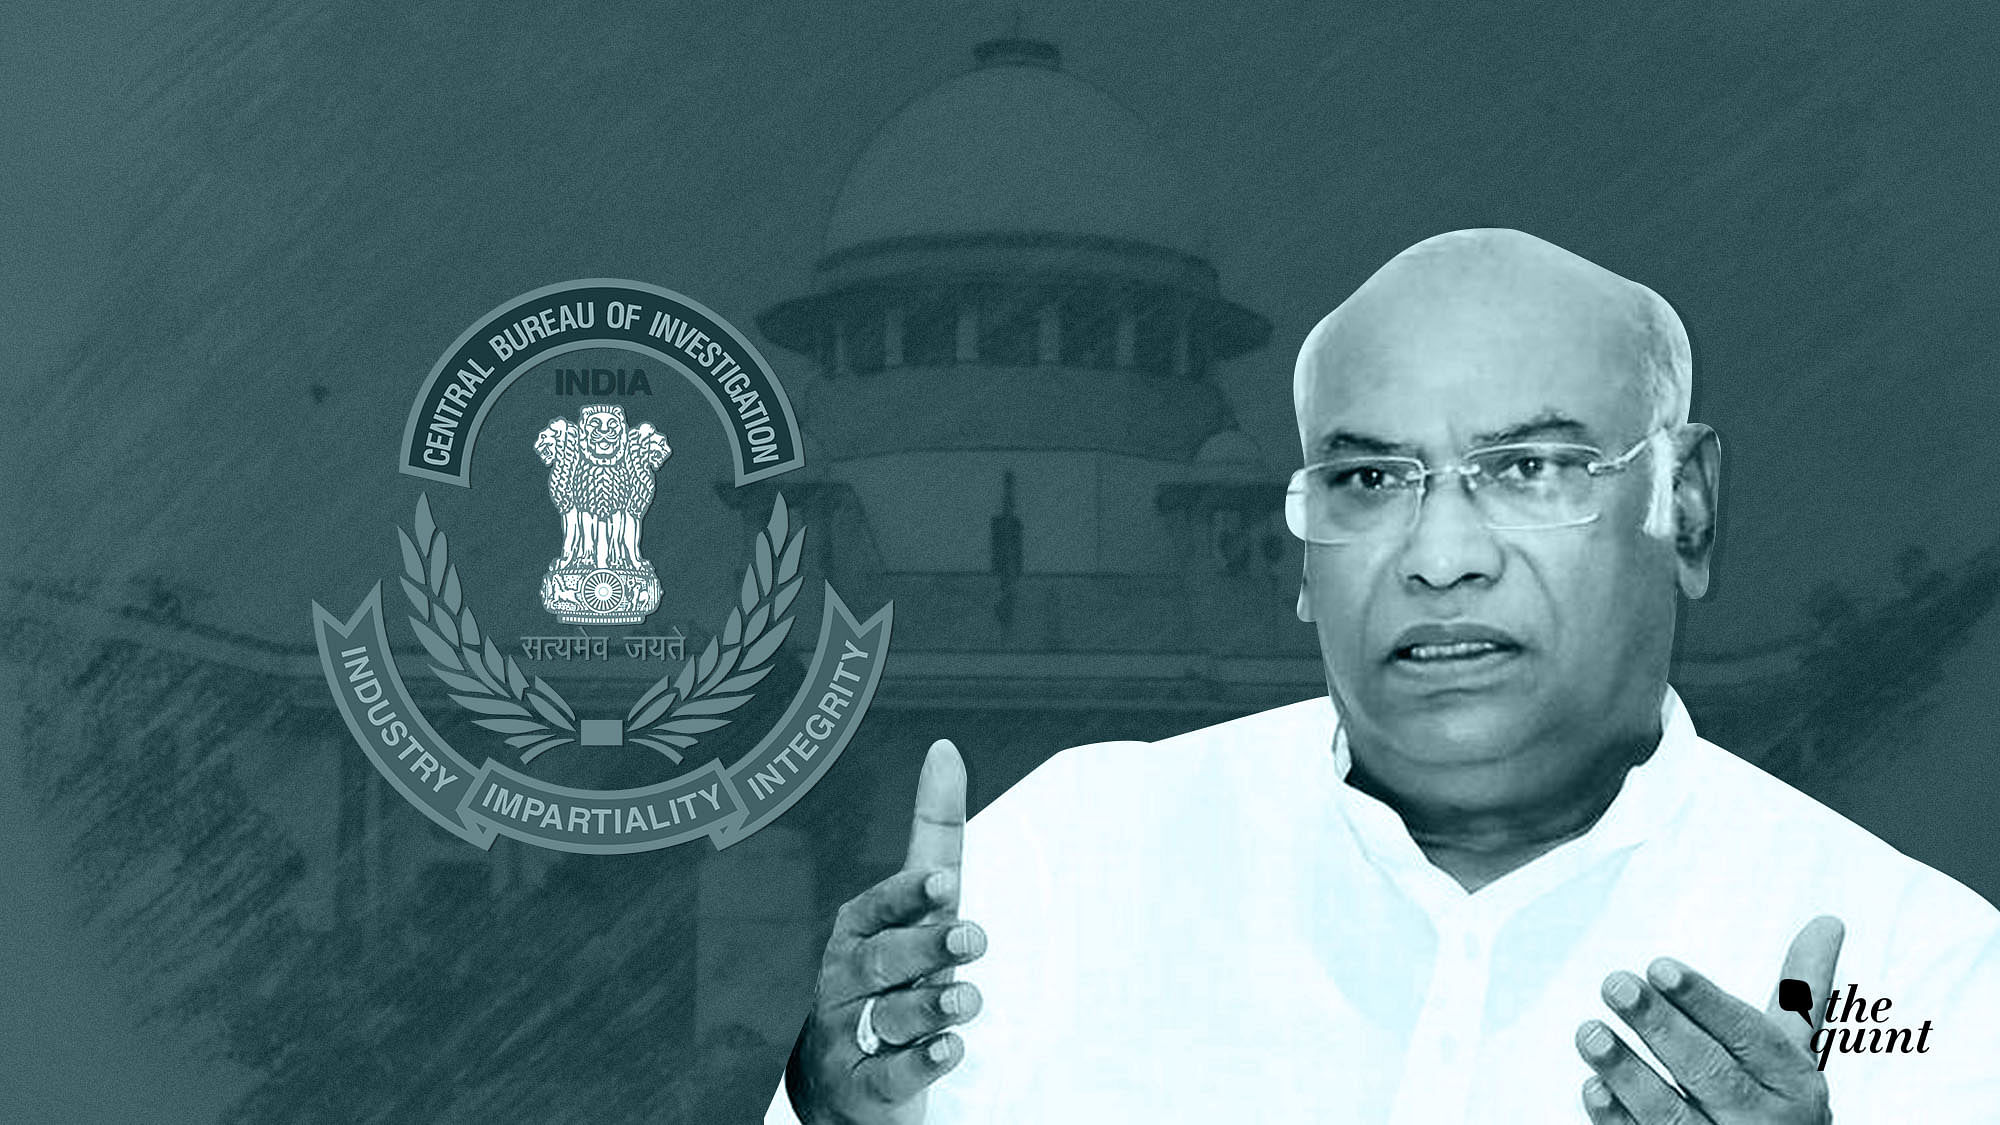 Congress leader Mallikarjun Kharge’s letter to PM on 14 January said appointment of interim director wasn’t discussed by the High Powered Committee, but Centre informed Supreme Court it was on 1 February.